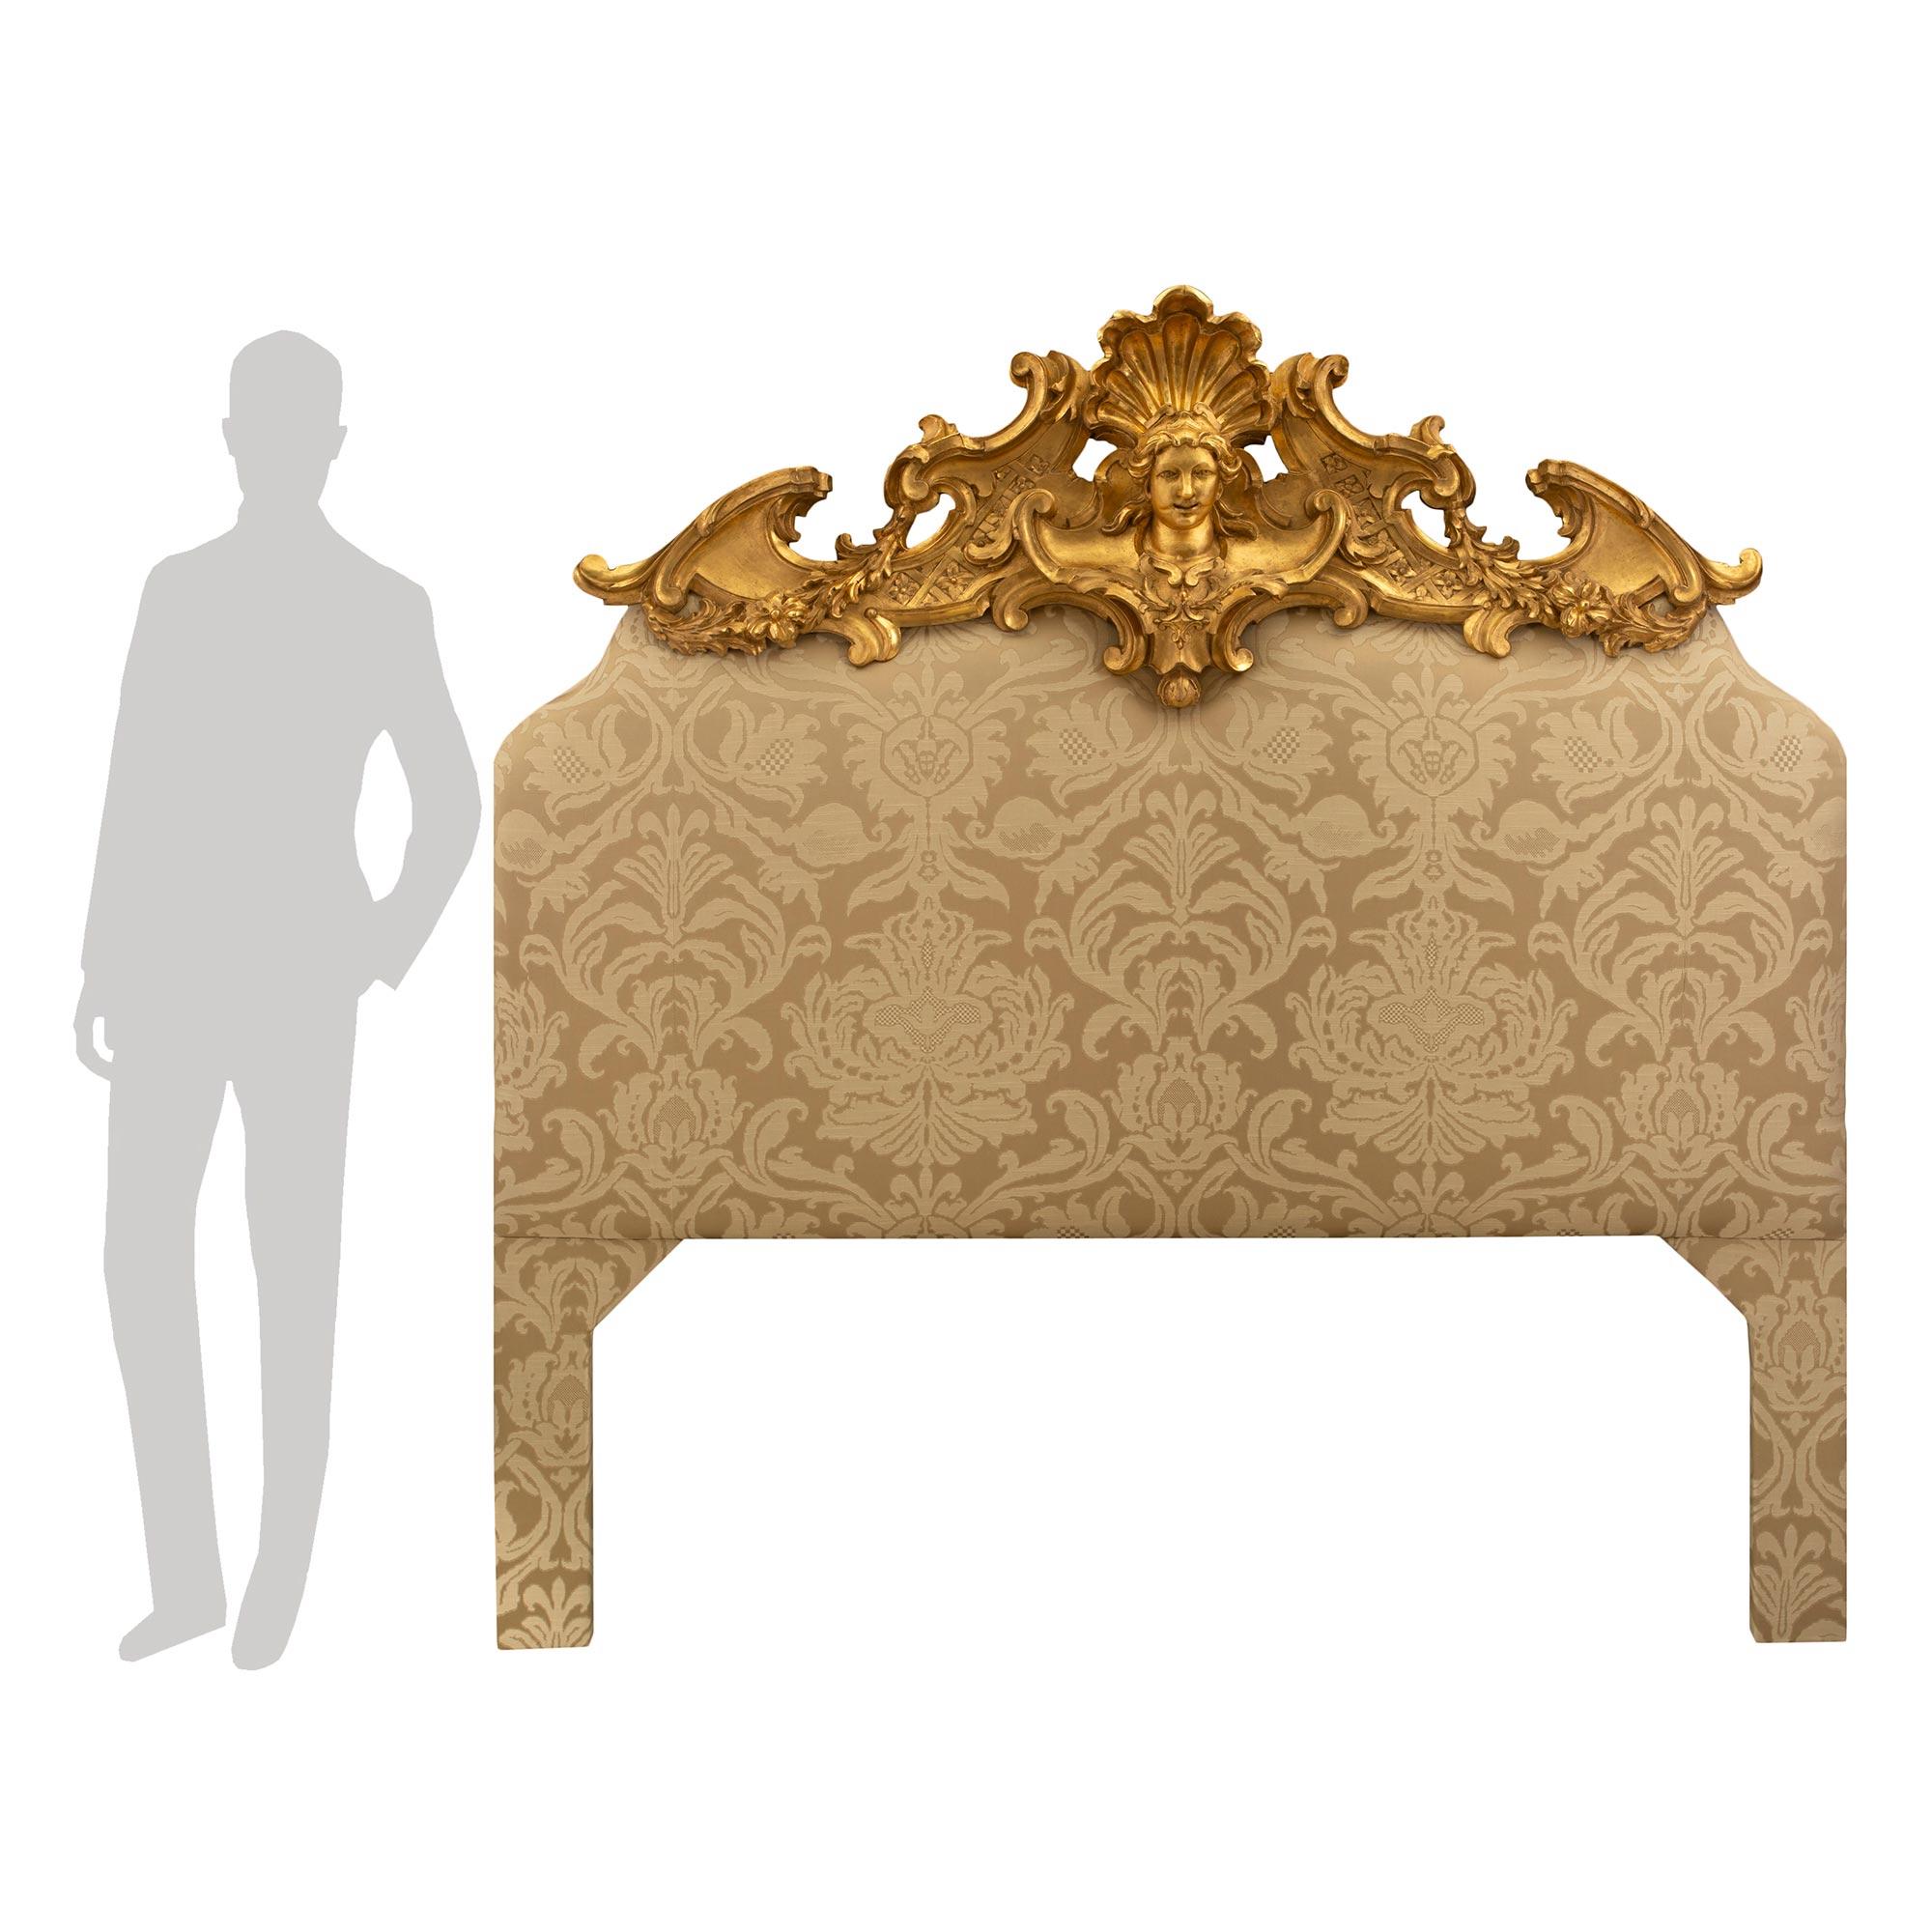 A striking Italian early 19th century Louis XV st. giltwood upholstered headboard. The headboard displays an impressive and most decorative carved giltwood top crown. The top crown is centered by a richly carved maiden's face with a beautiful